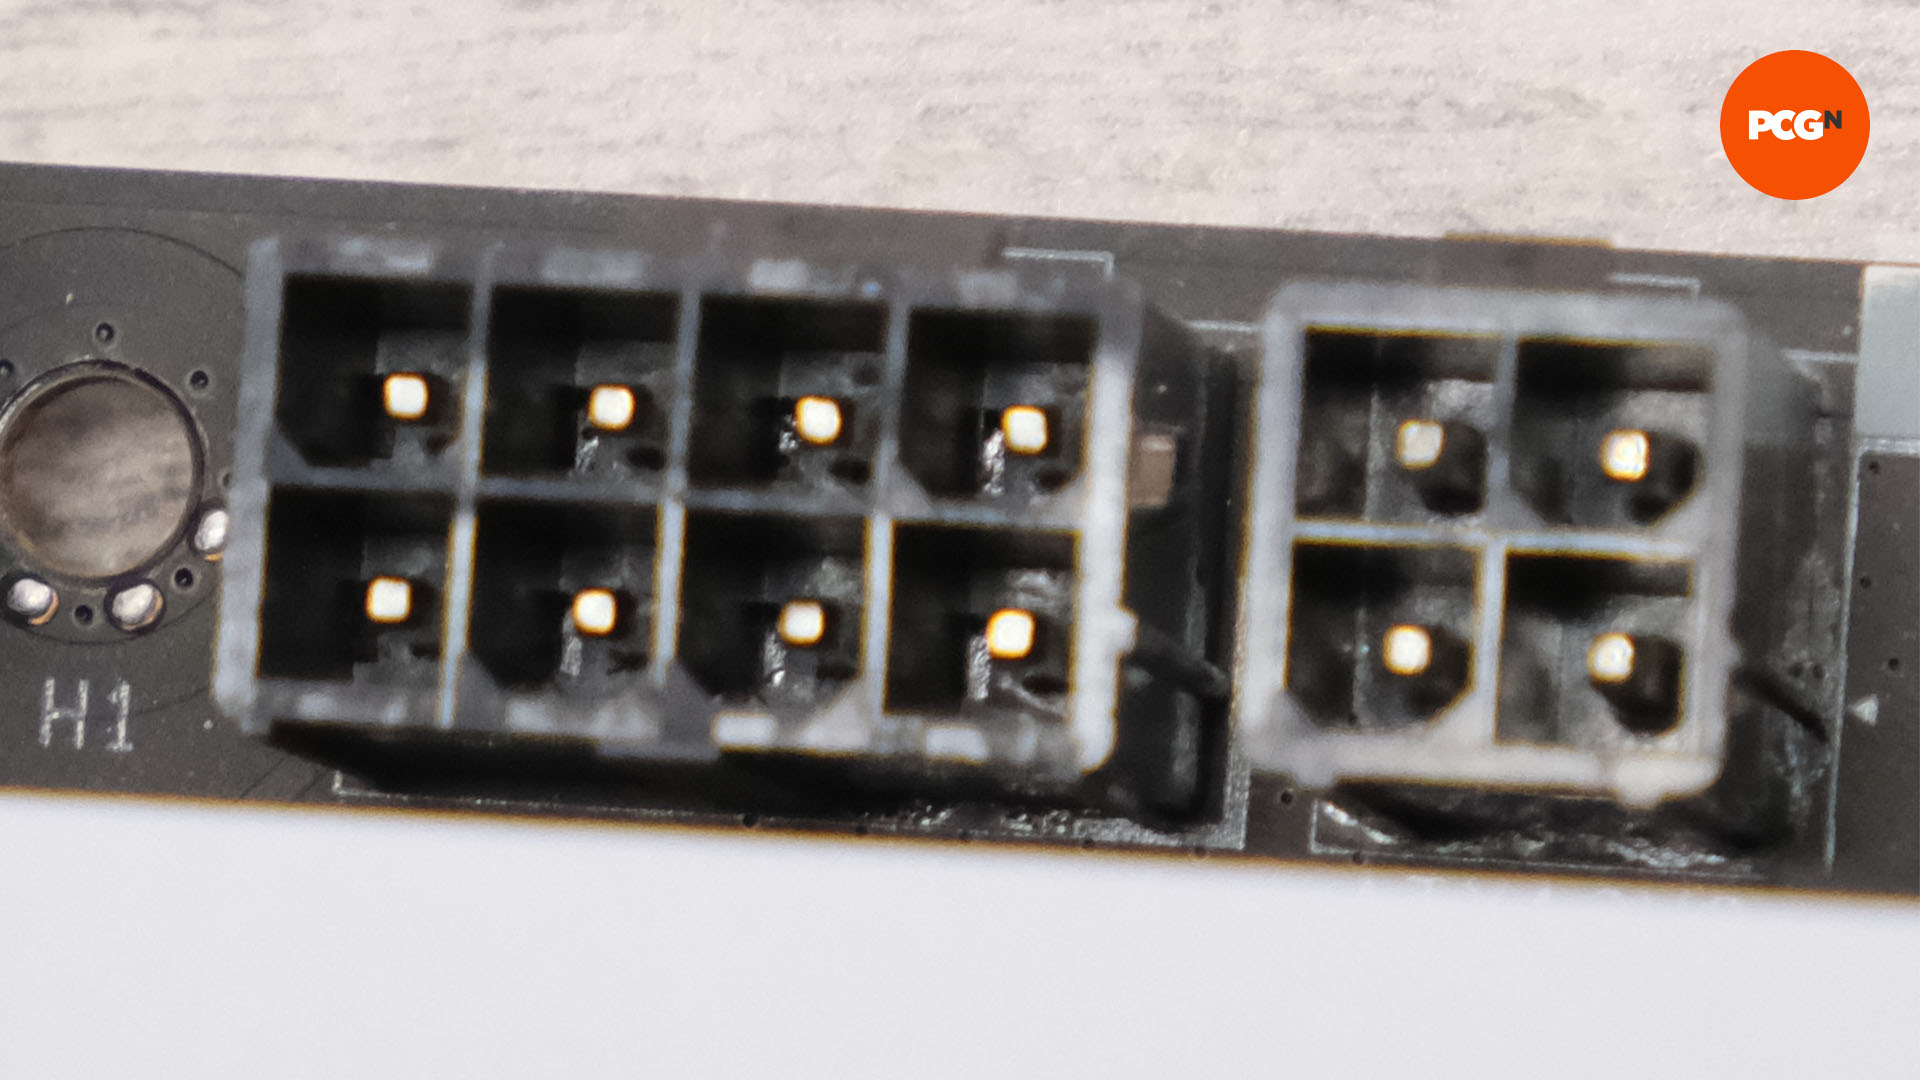 A CPU power socket for building a gaming PC